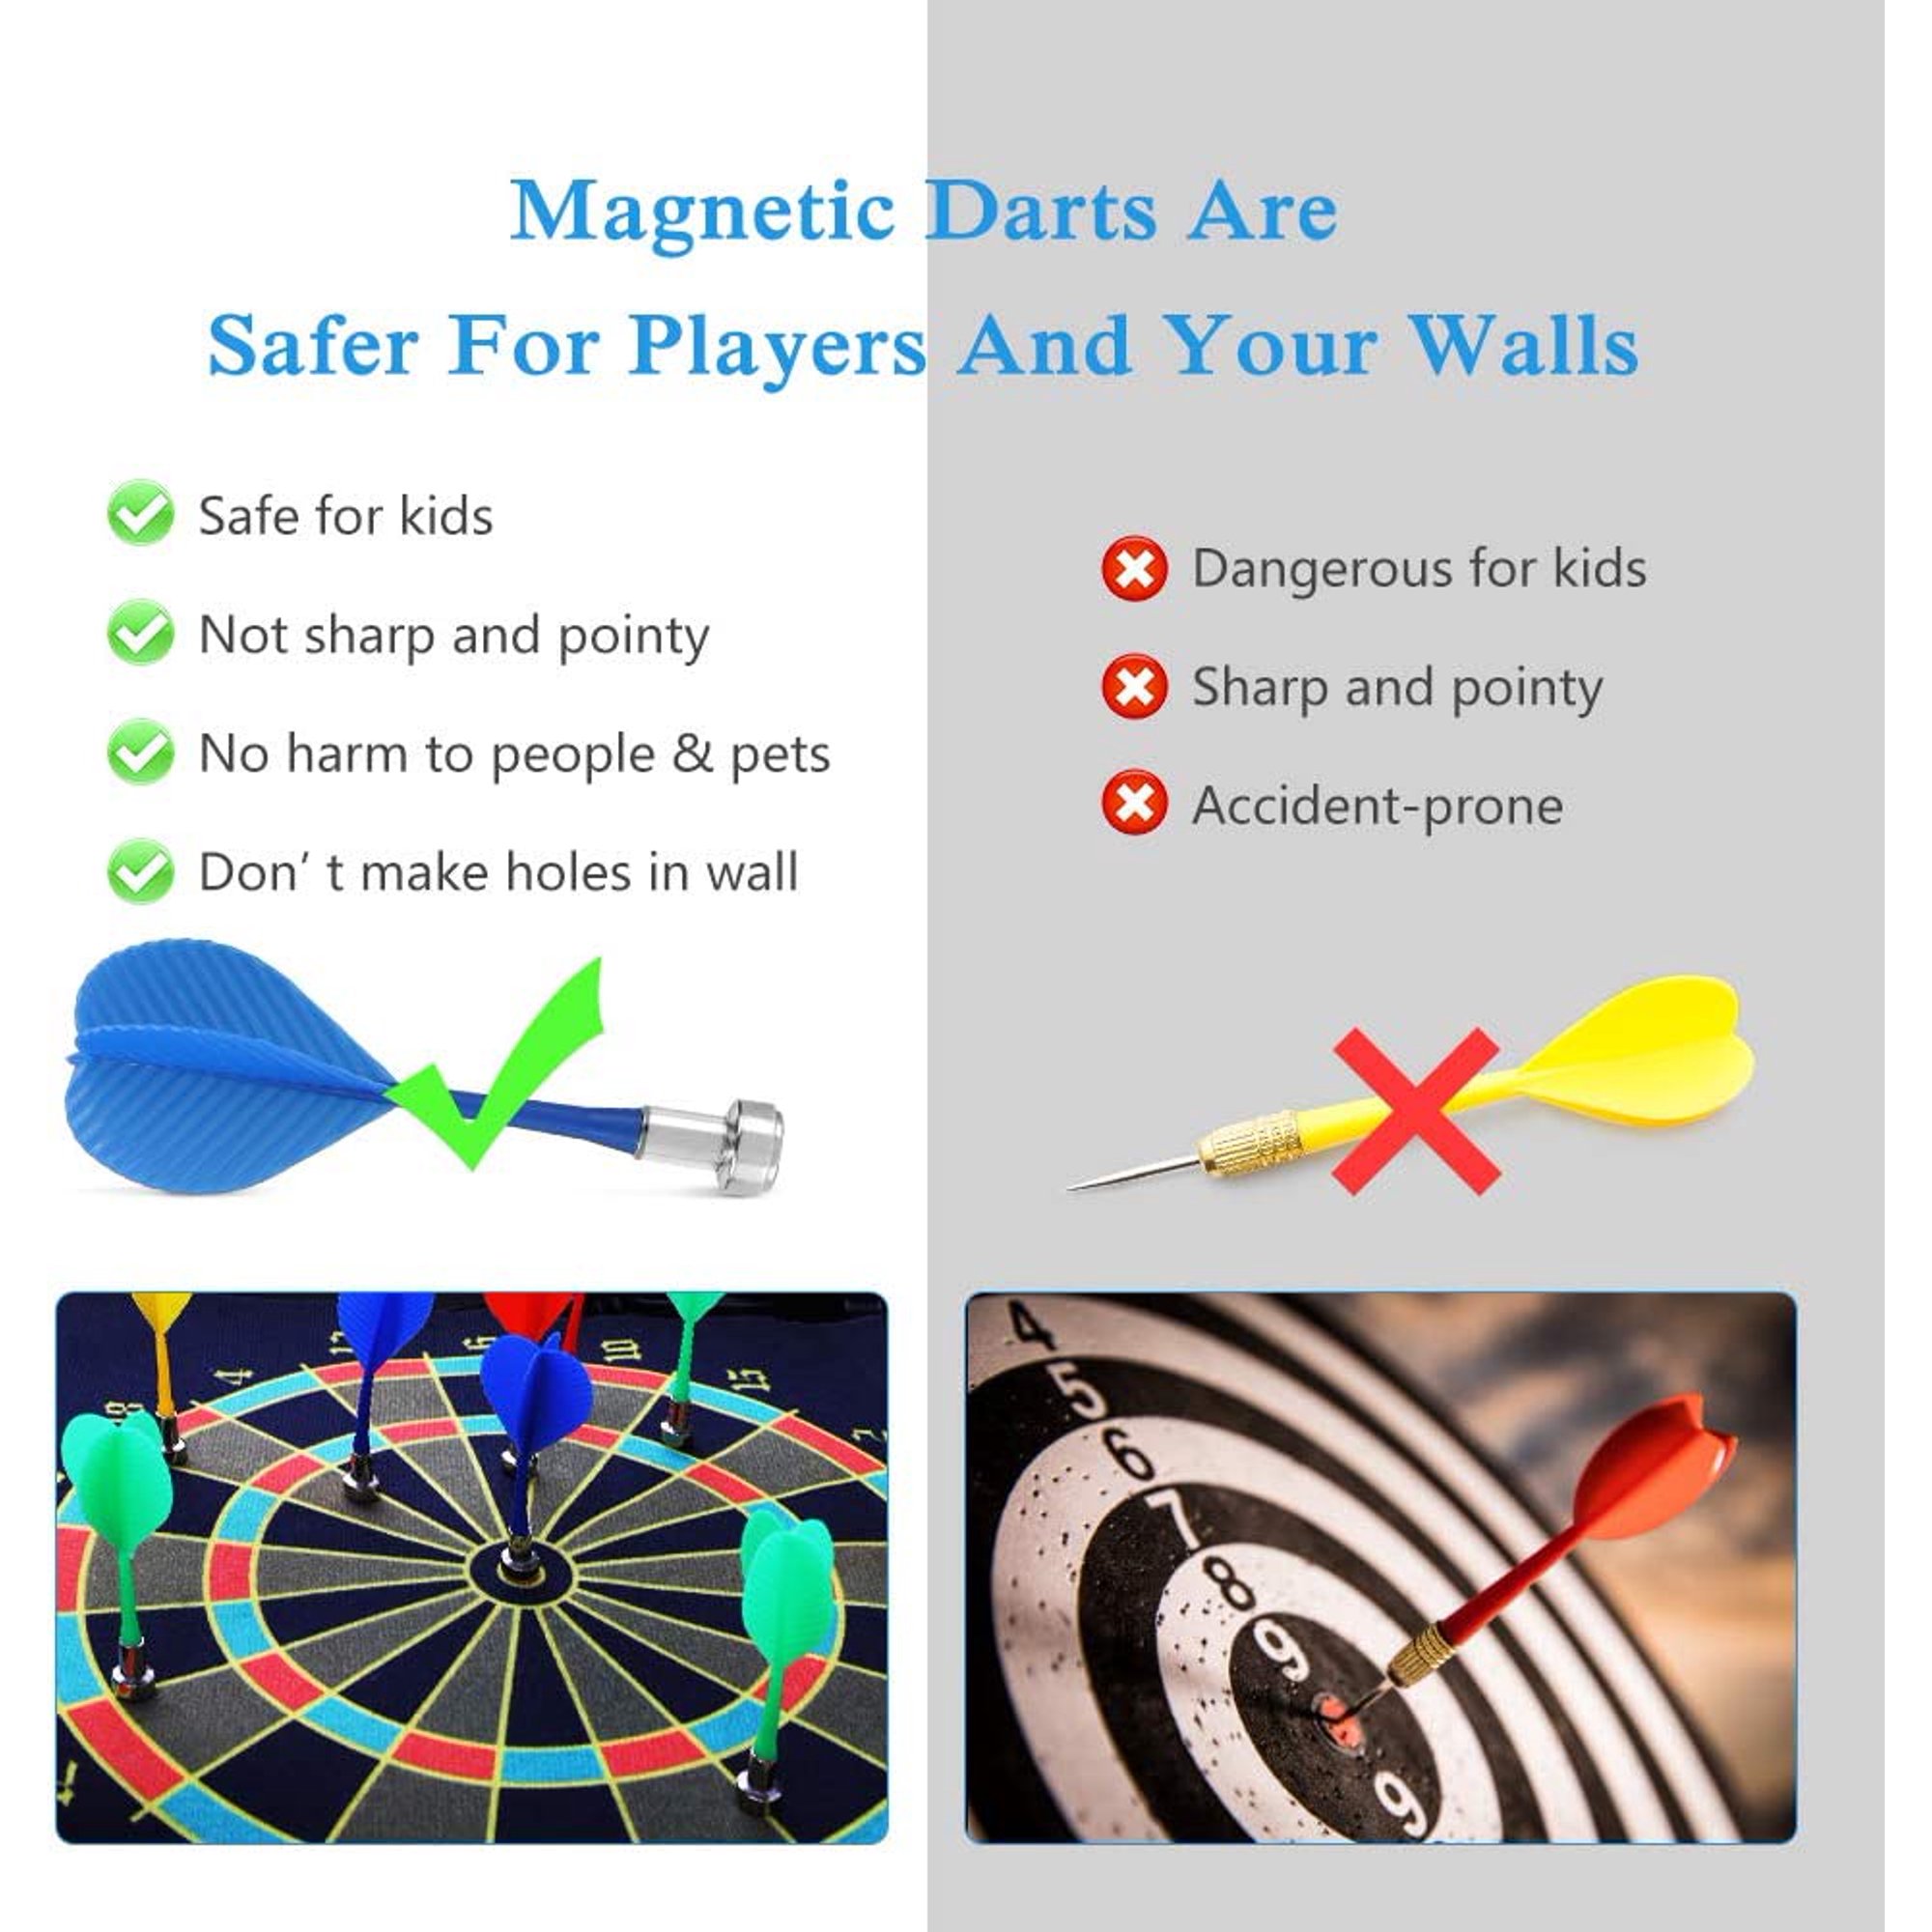 "Magnetic Dart Board, Happiwiz Safe Party Games Indoor Outdoor, Cool Toy Gifts for 5 6 7 8 9 10 11 12 13 Year Old Boy, Double-Sided, 9pcs Safe Darts, Easily Hangs Anywhere" - image 4 of 7